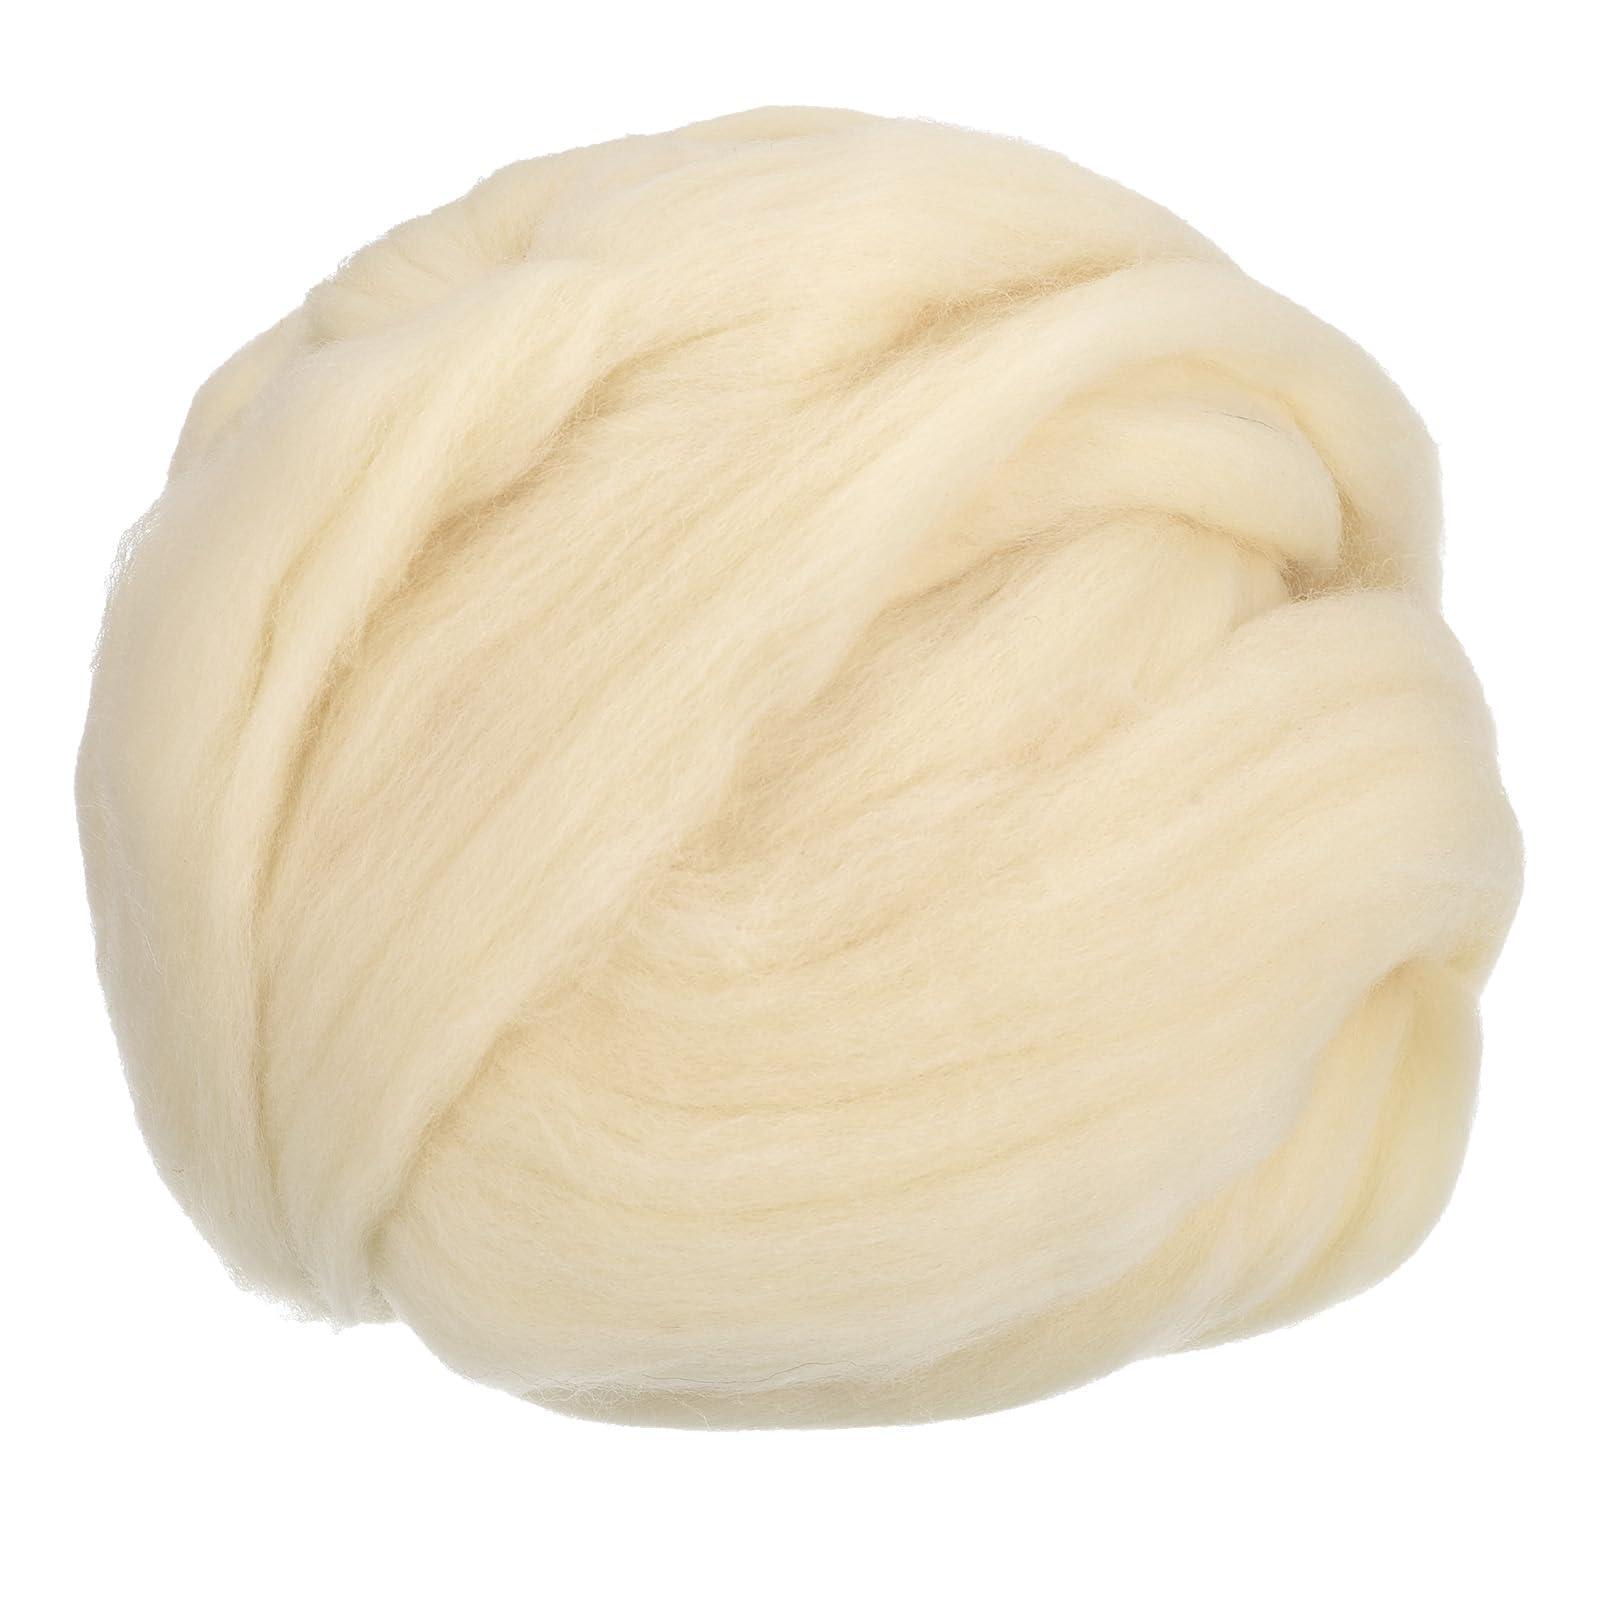 sourcing map Needle Felting Wool, 8.5 Oz Nature Fibre Wool Yarn Roving for Wet Felting, Handcrafts, DIY Materials (Light Apricot White)